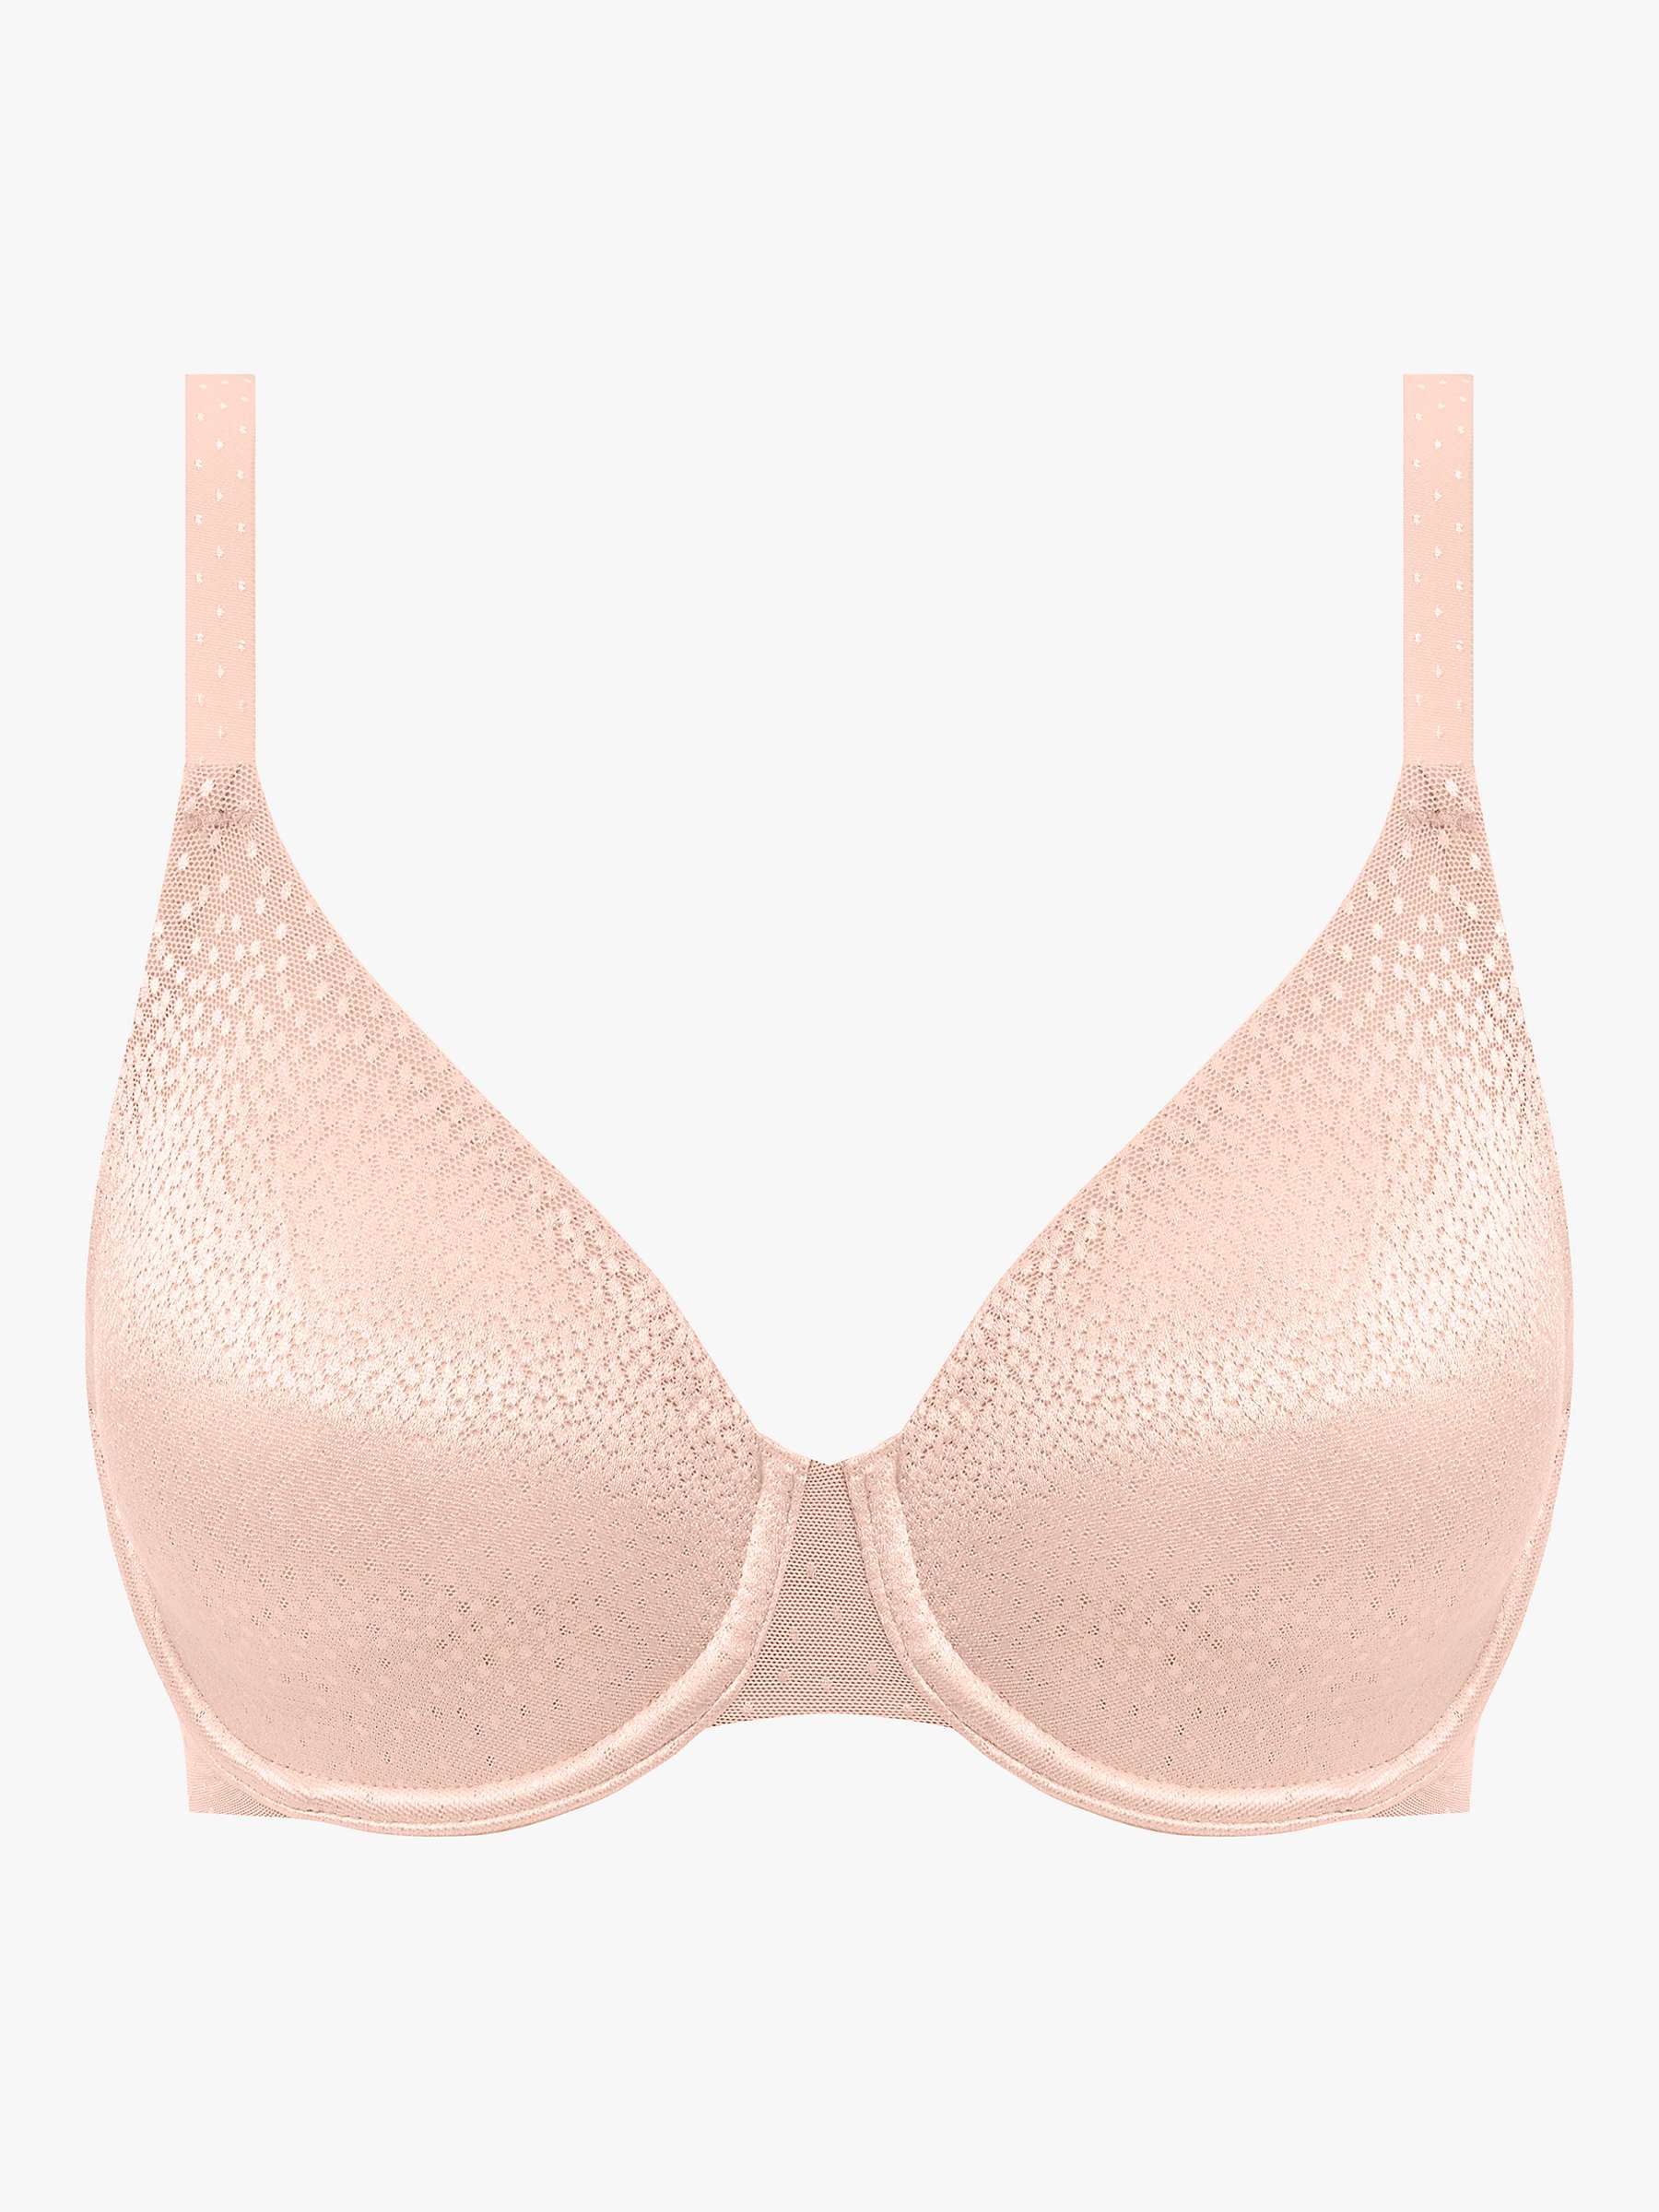 Buy Wacoal Back Appeal Smoothing Underwired Bra, Rose Dust Online at johnlewis.com